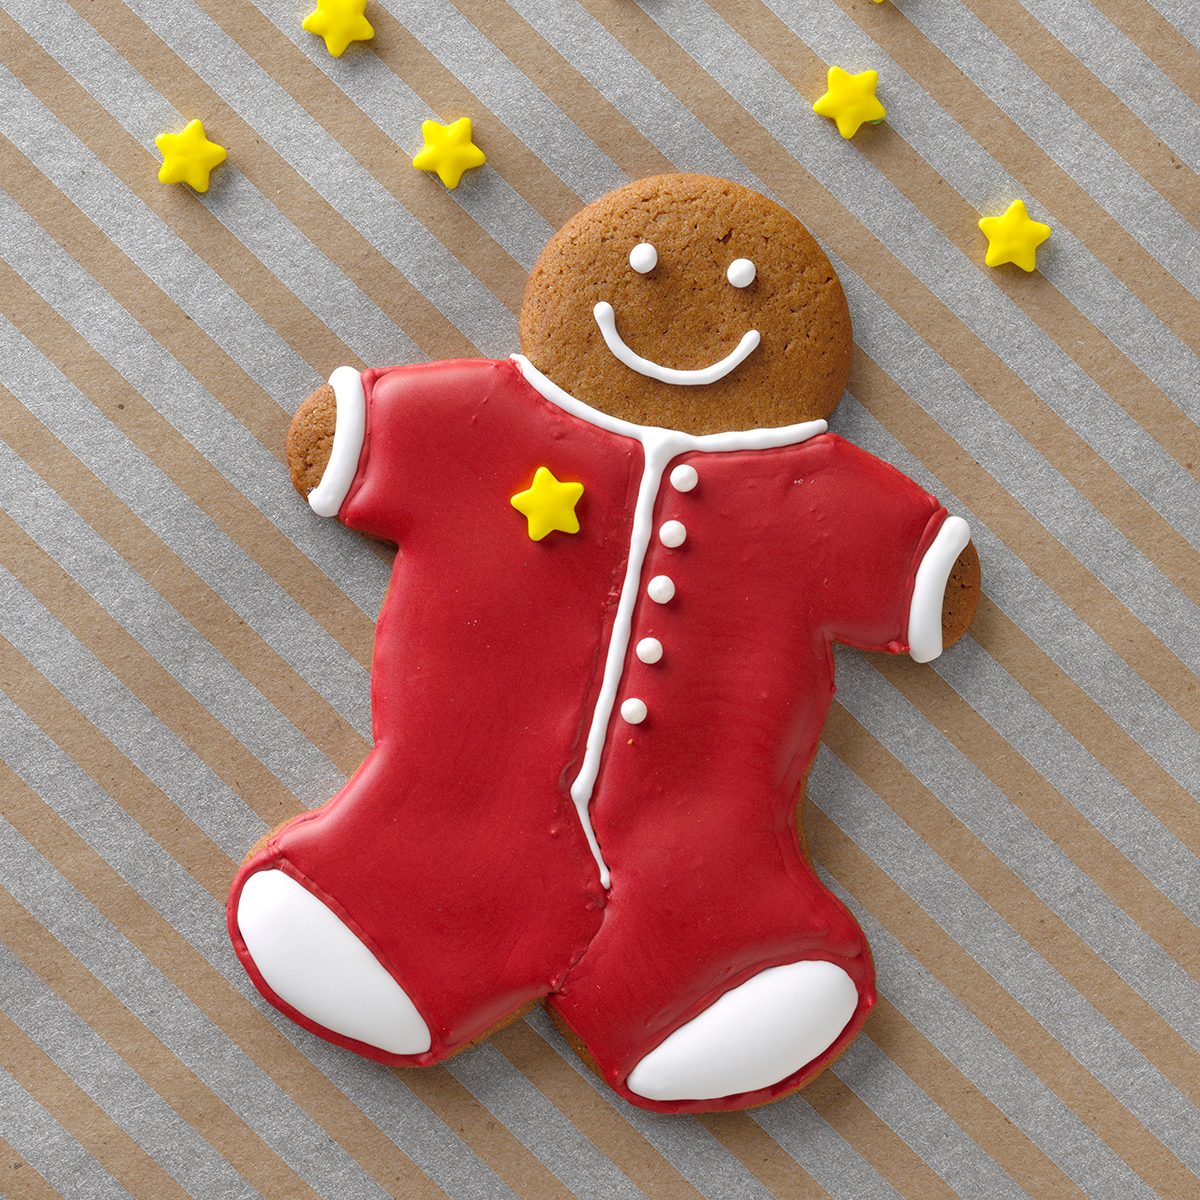 20 Gingerbread Decorating Ideas from Easy to Elaborate